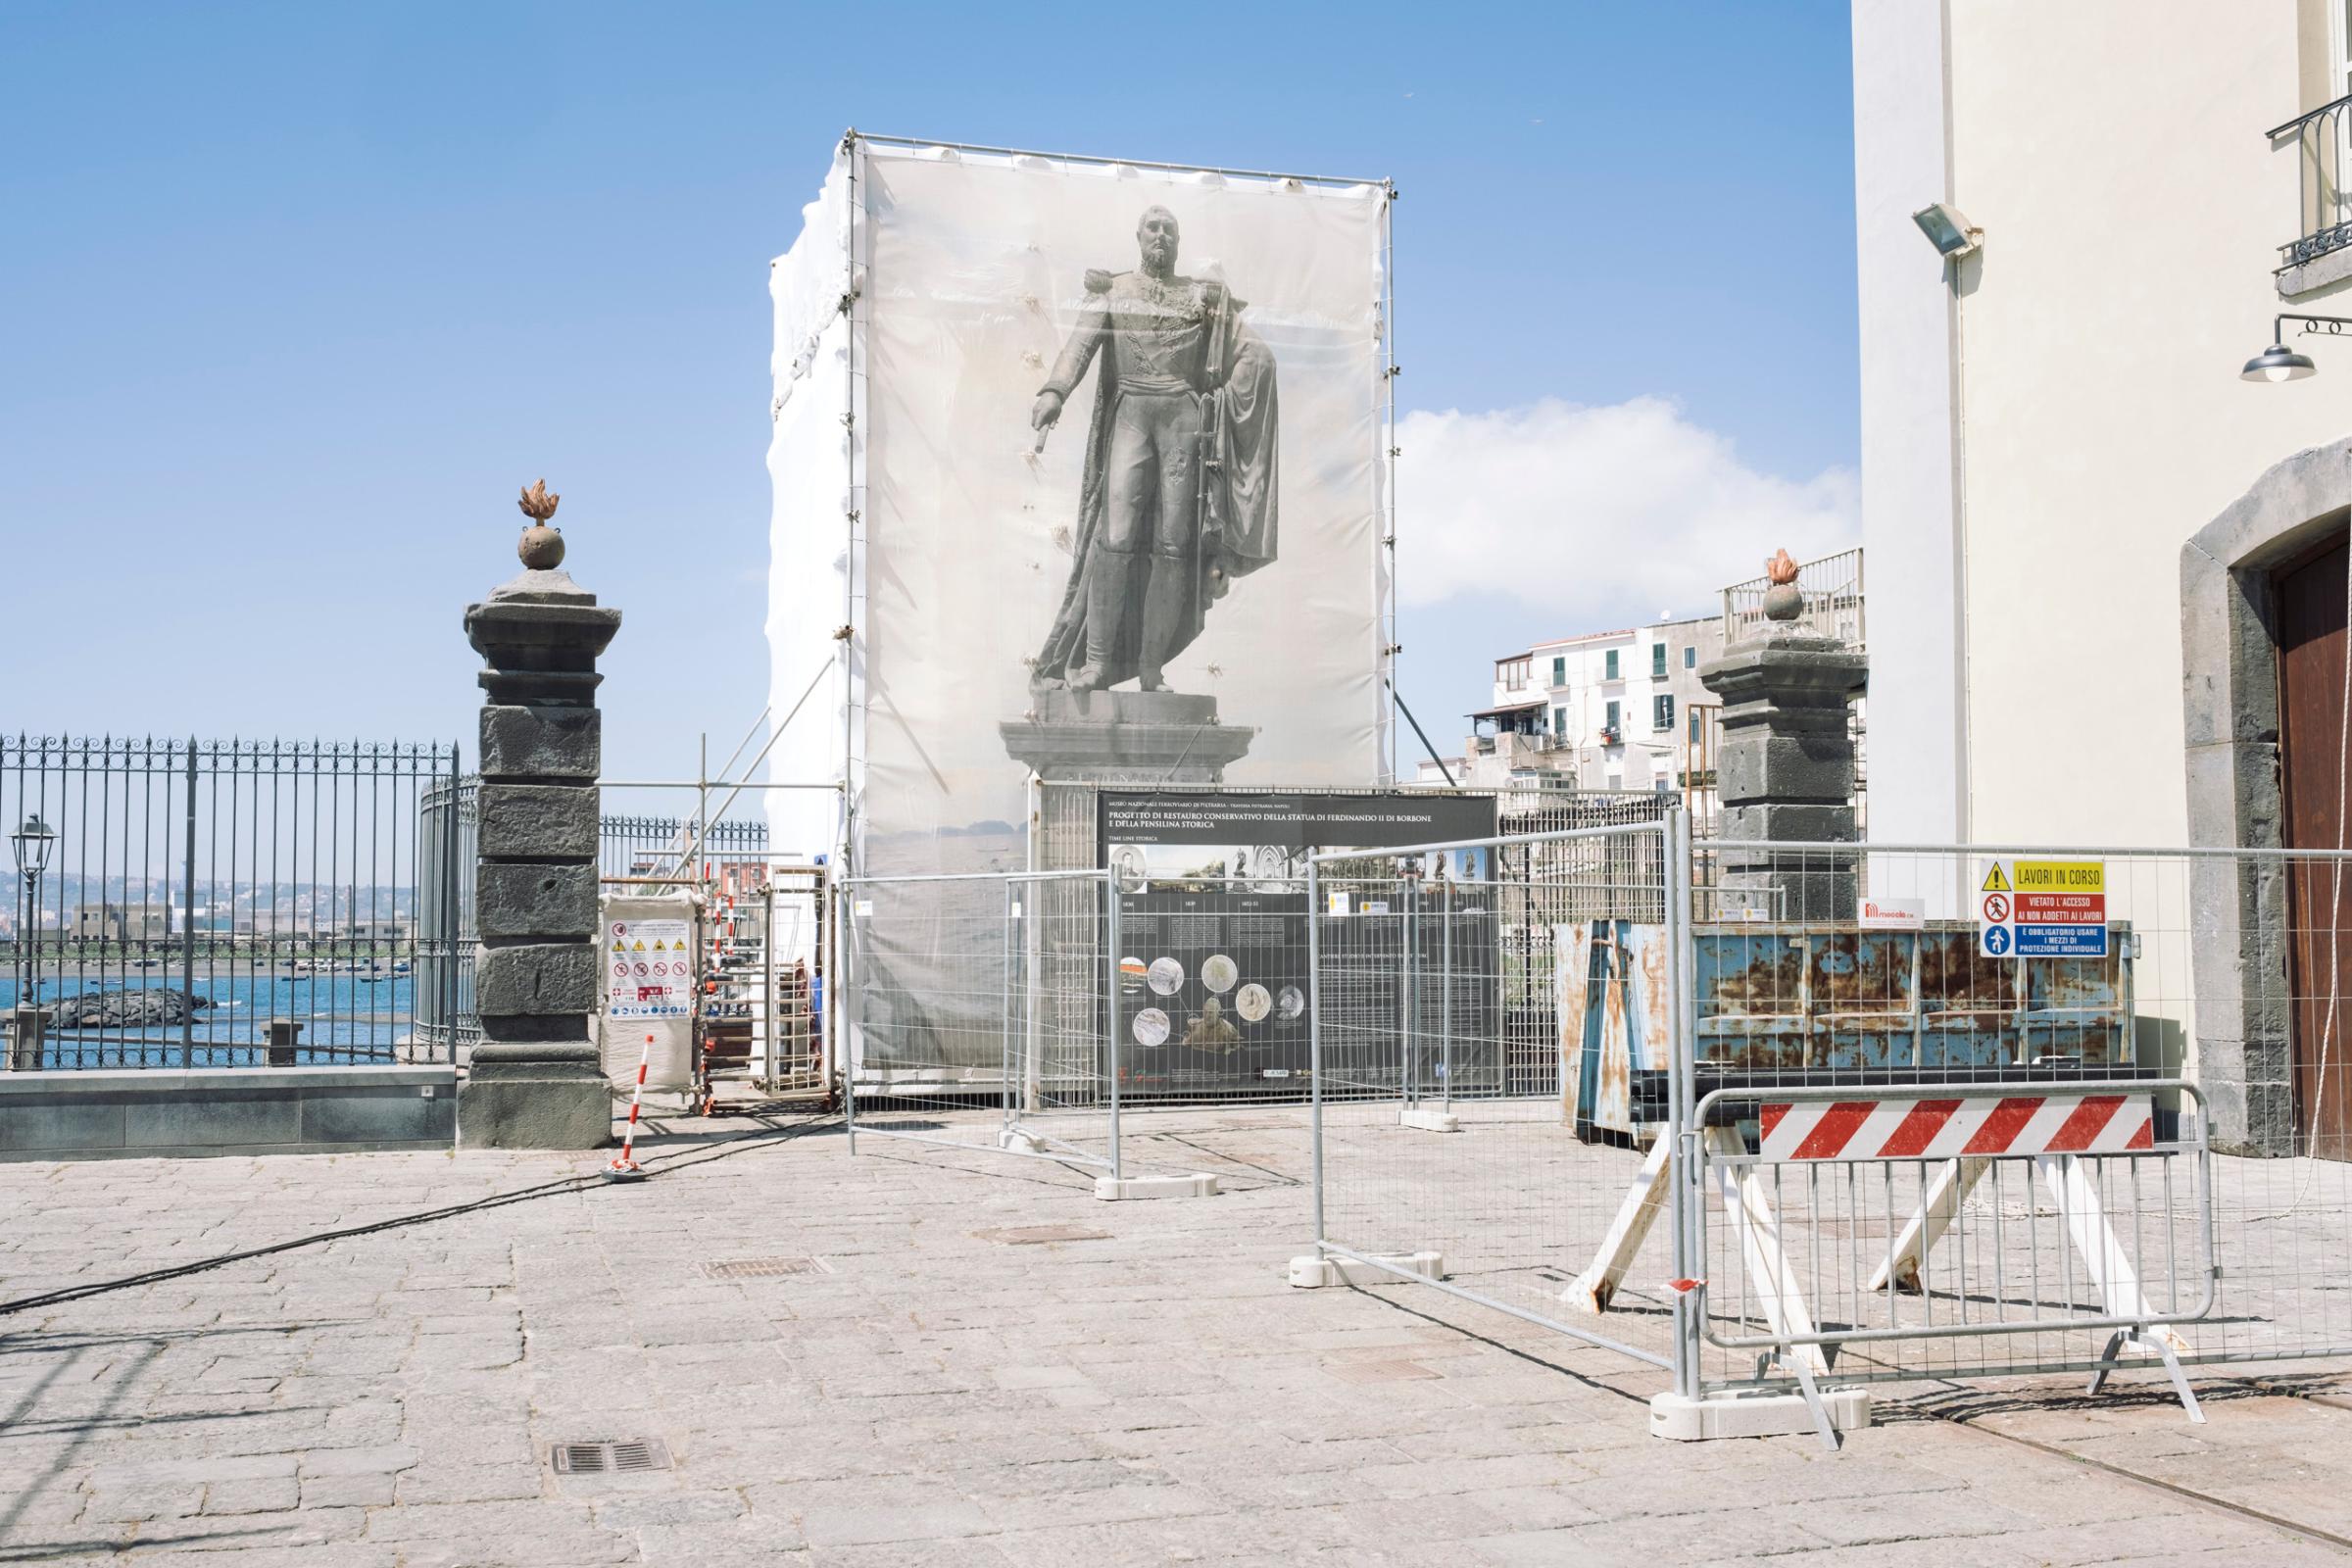 Works are underway to restore the statue of Ferdinando II of Two Sicilies at the Railway Museum of Pietrarsa, April, 2016.Pietrarsa was an active factory for locomotive and ammunition production until the unification of Italy, when production steadily decreased and eventually brought the factory to a closure.